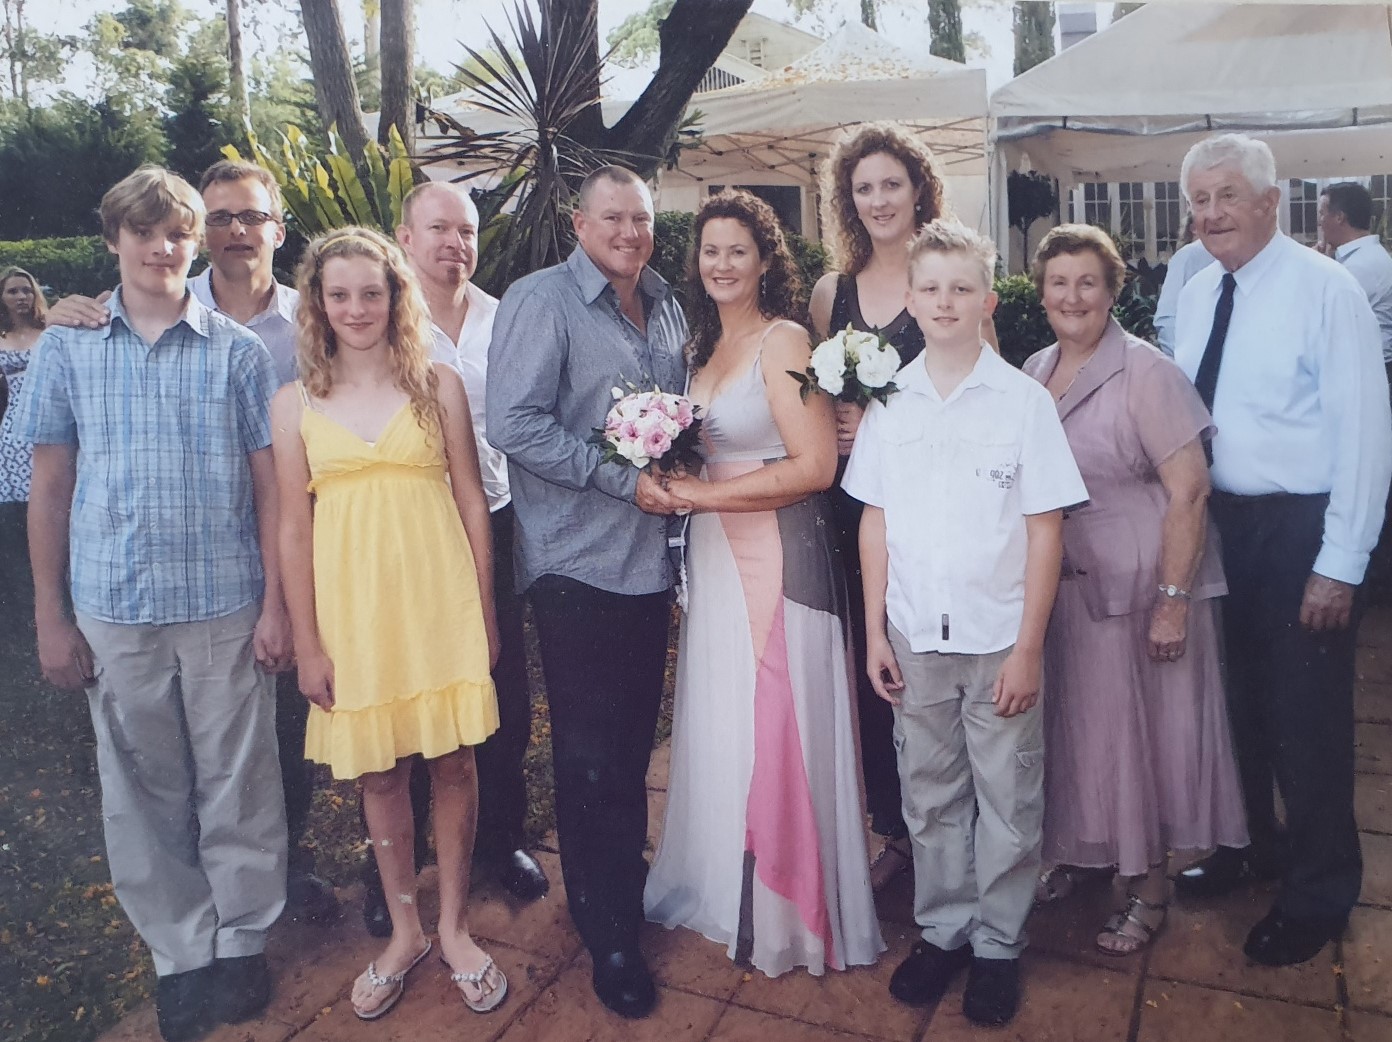 Peter and Libby Rough’s wedding day: From left, Jack Chatters, Mark Chatters, Sammy Chatters, Stuart McKenzie, Peter and Libby Rough, Sue Chatters, Nick Chatters, Jan and Ron McKenzie.